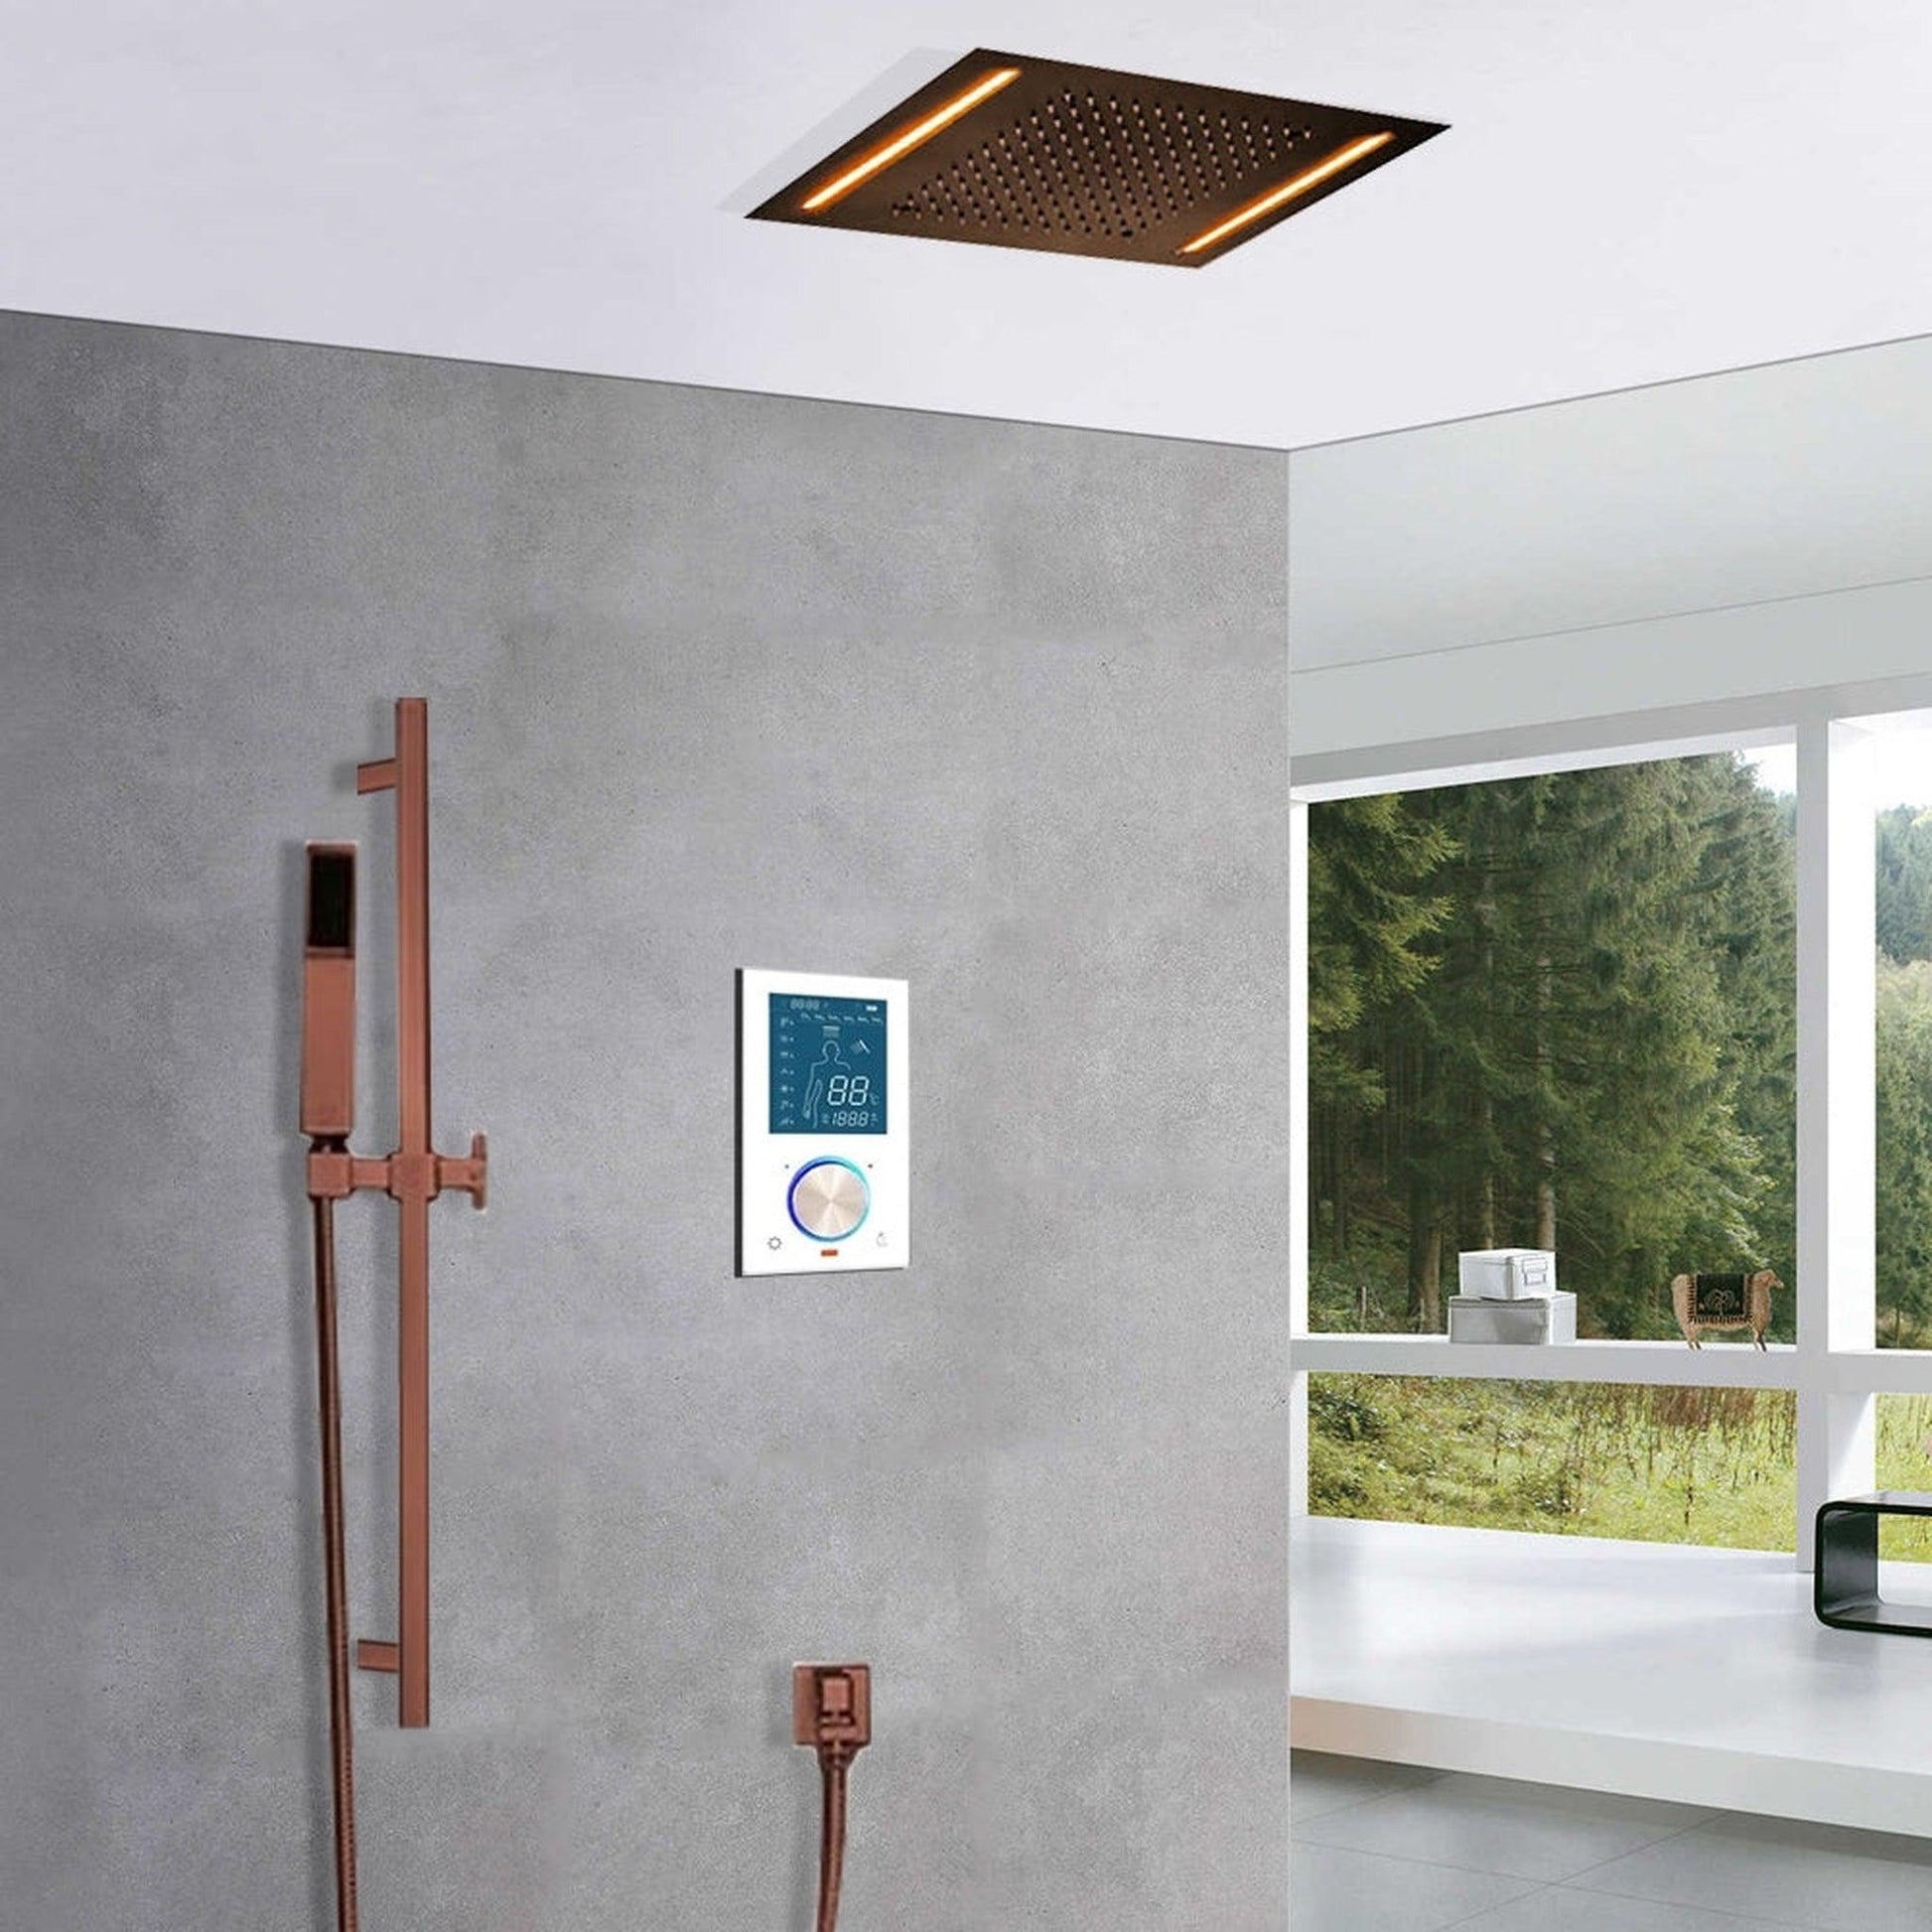 FontanaShowers Creative Luxury Light Oil Rubbed Bronze Rectangular Ceiling Mounted Rainfall Shower System With Smart & Intelligent LED Touch Control and Hand Shower